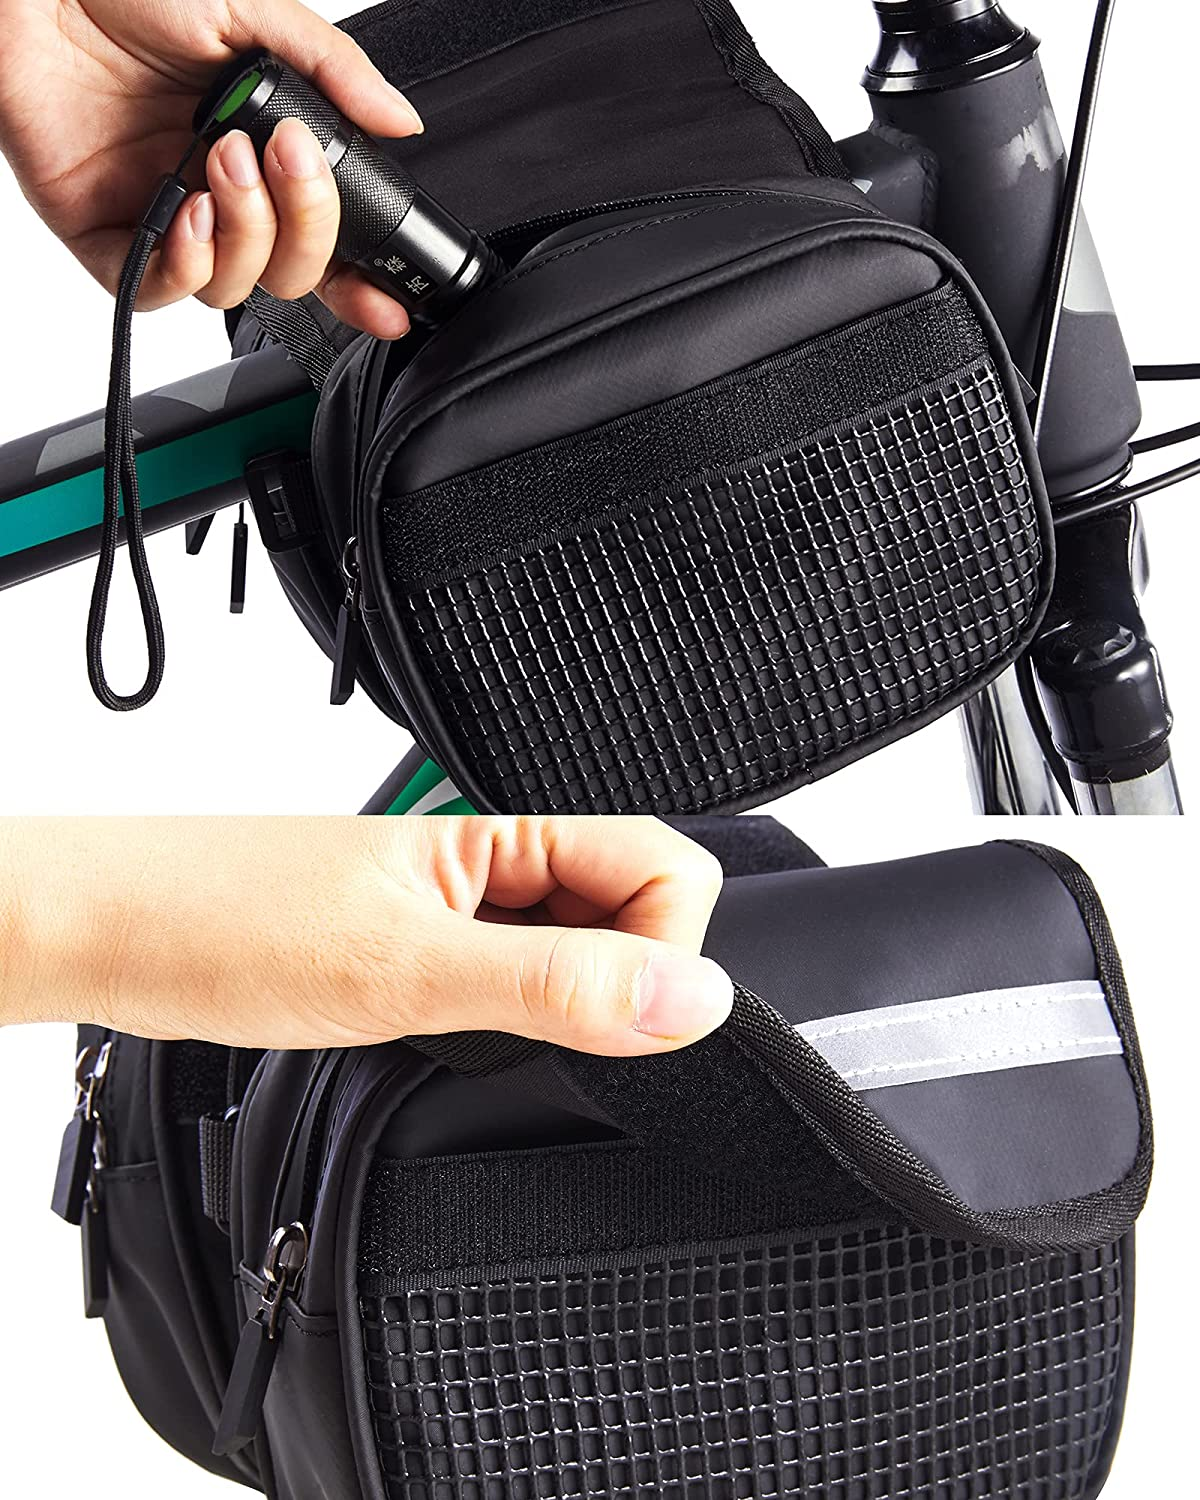 A front frame bag like this is a great way to keep your mountain bike tools safely locked away.